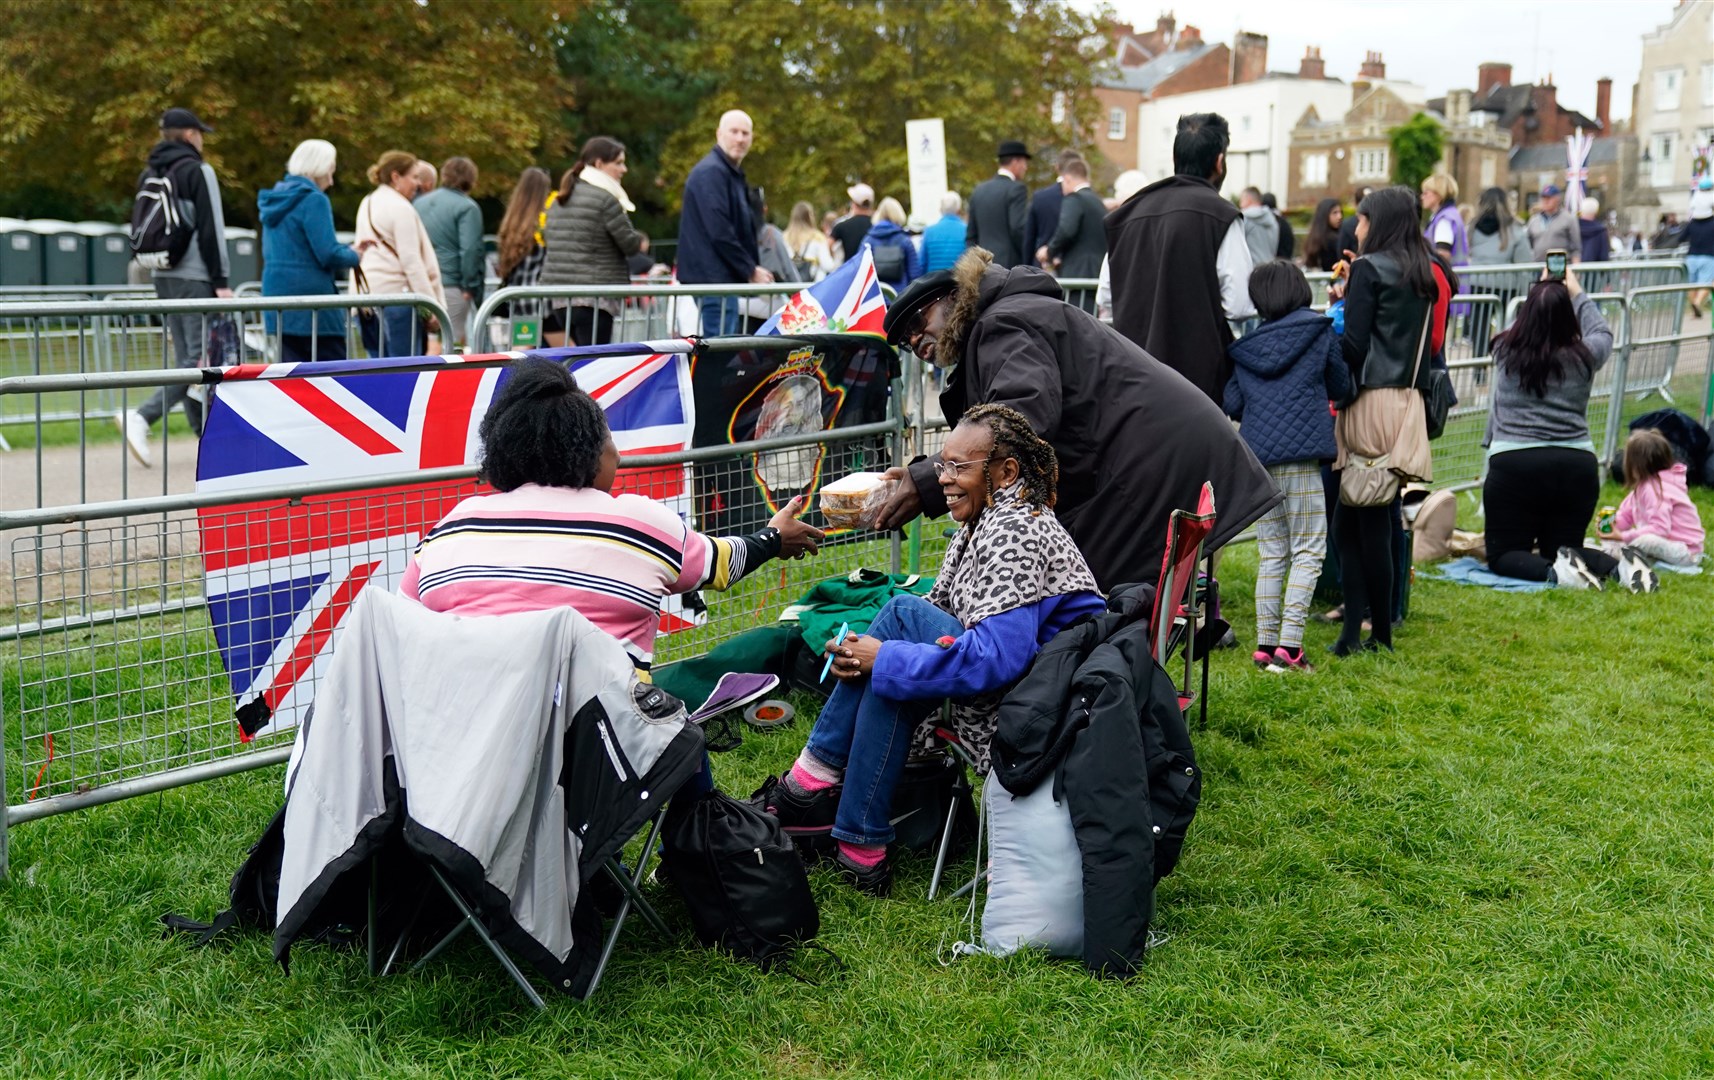 Some set up chairs next to the barriers (Andrew Matthews/PA)